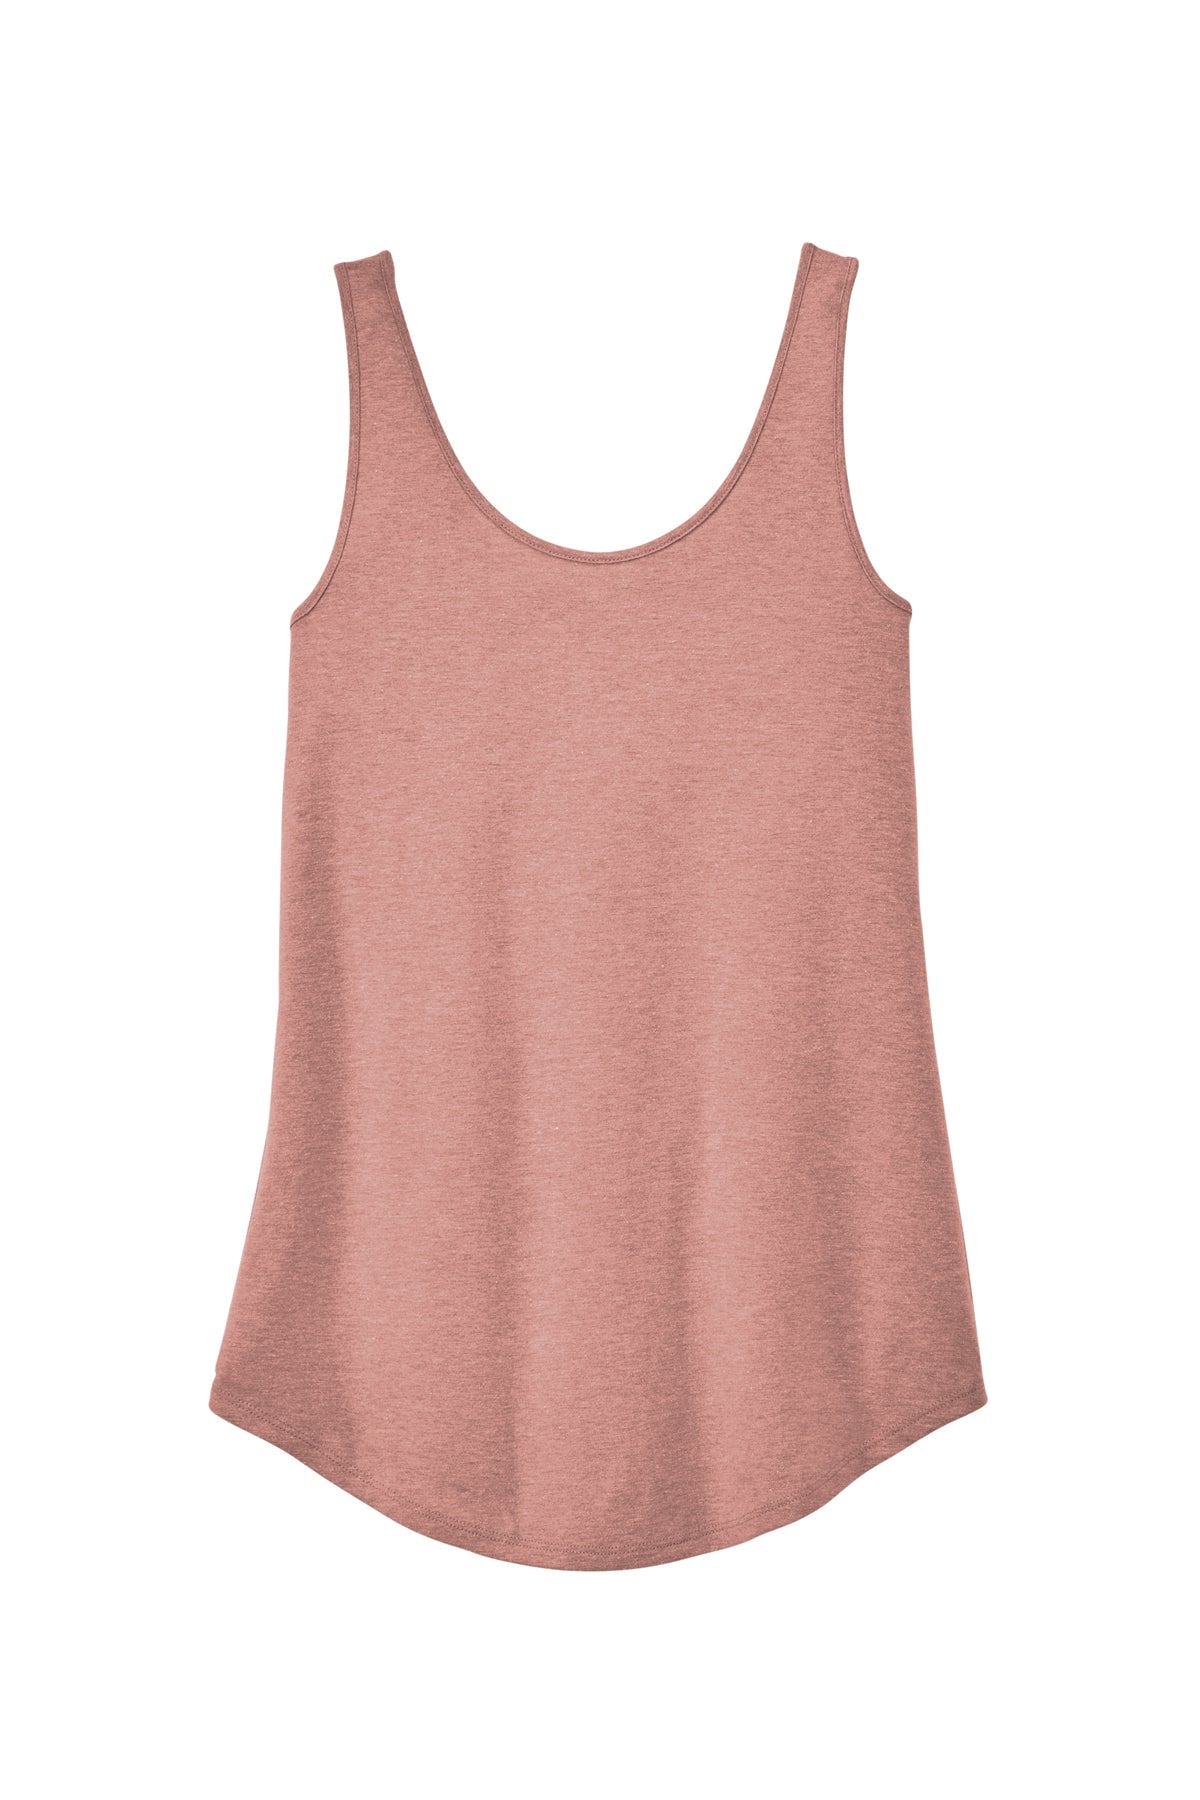 DT151 District® Women’s Perfect Tri® Relaxed Tank